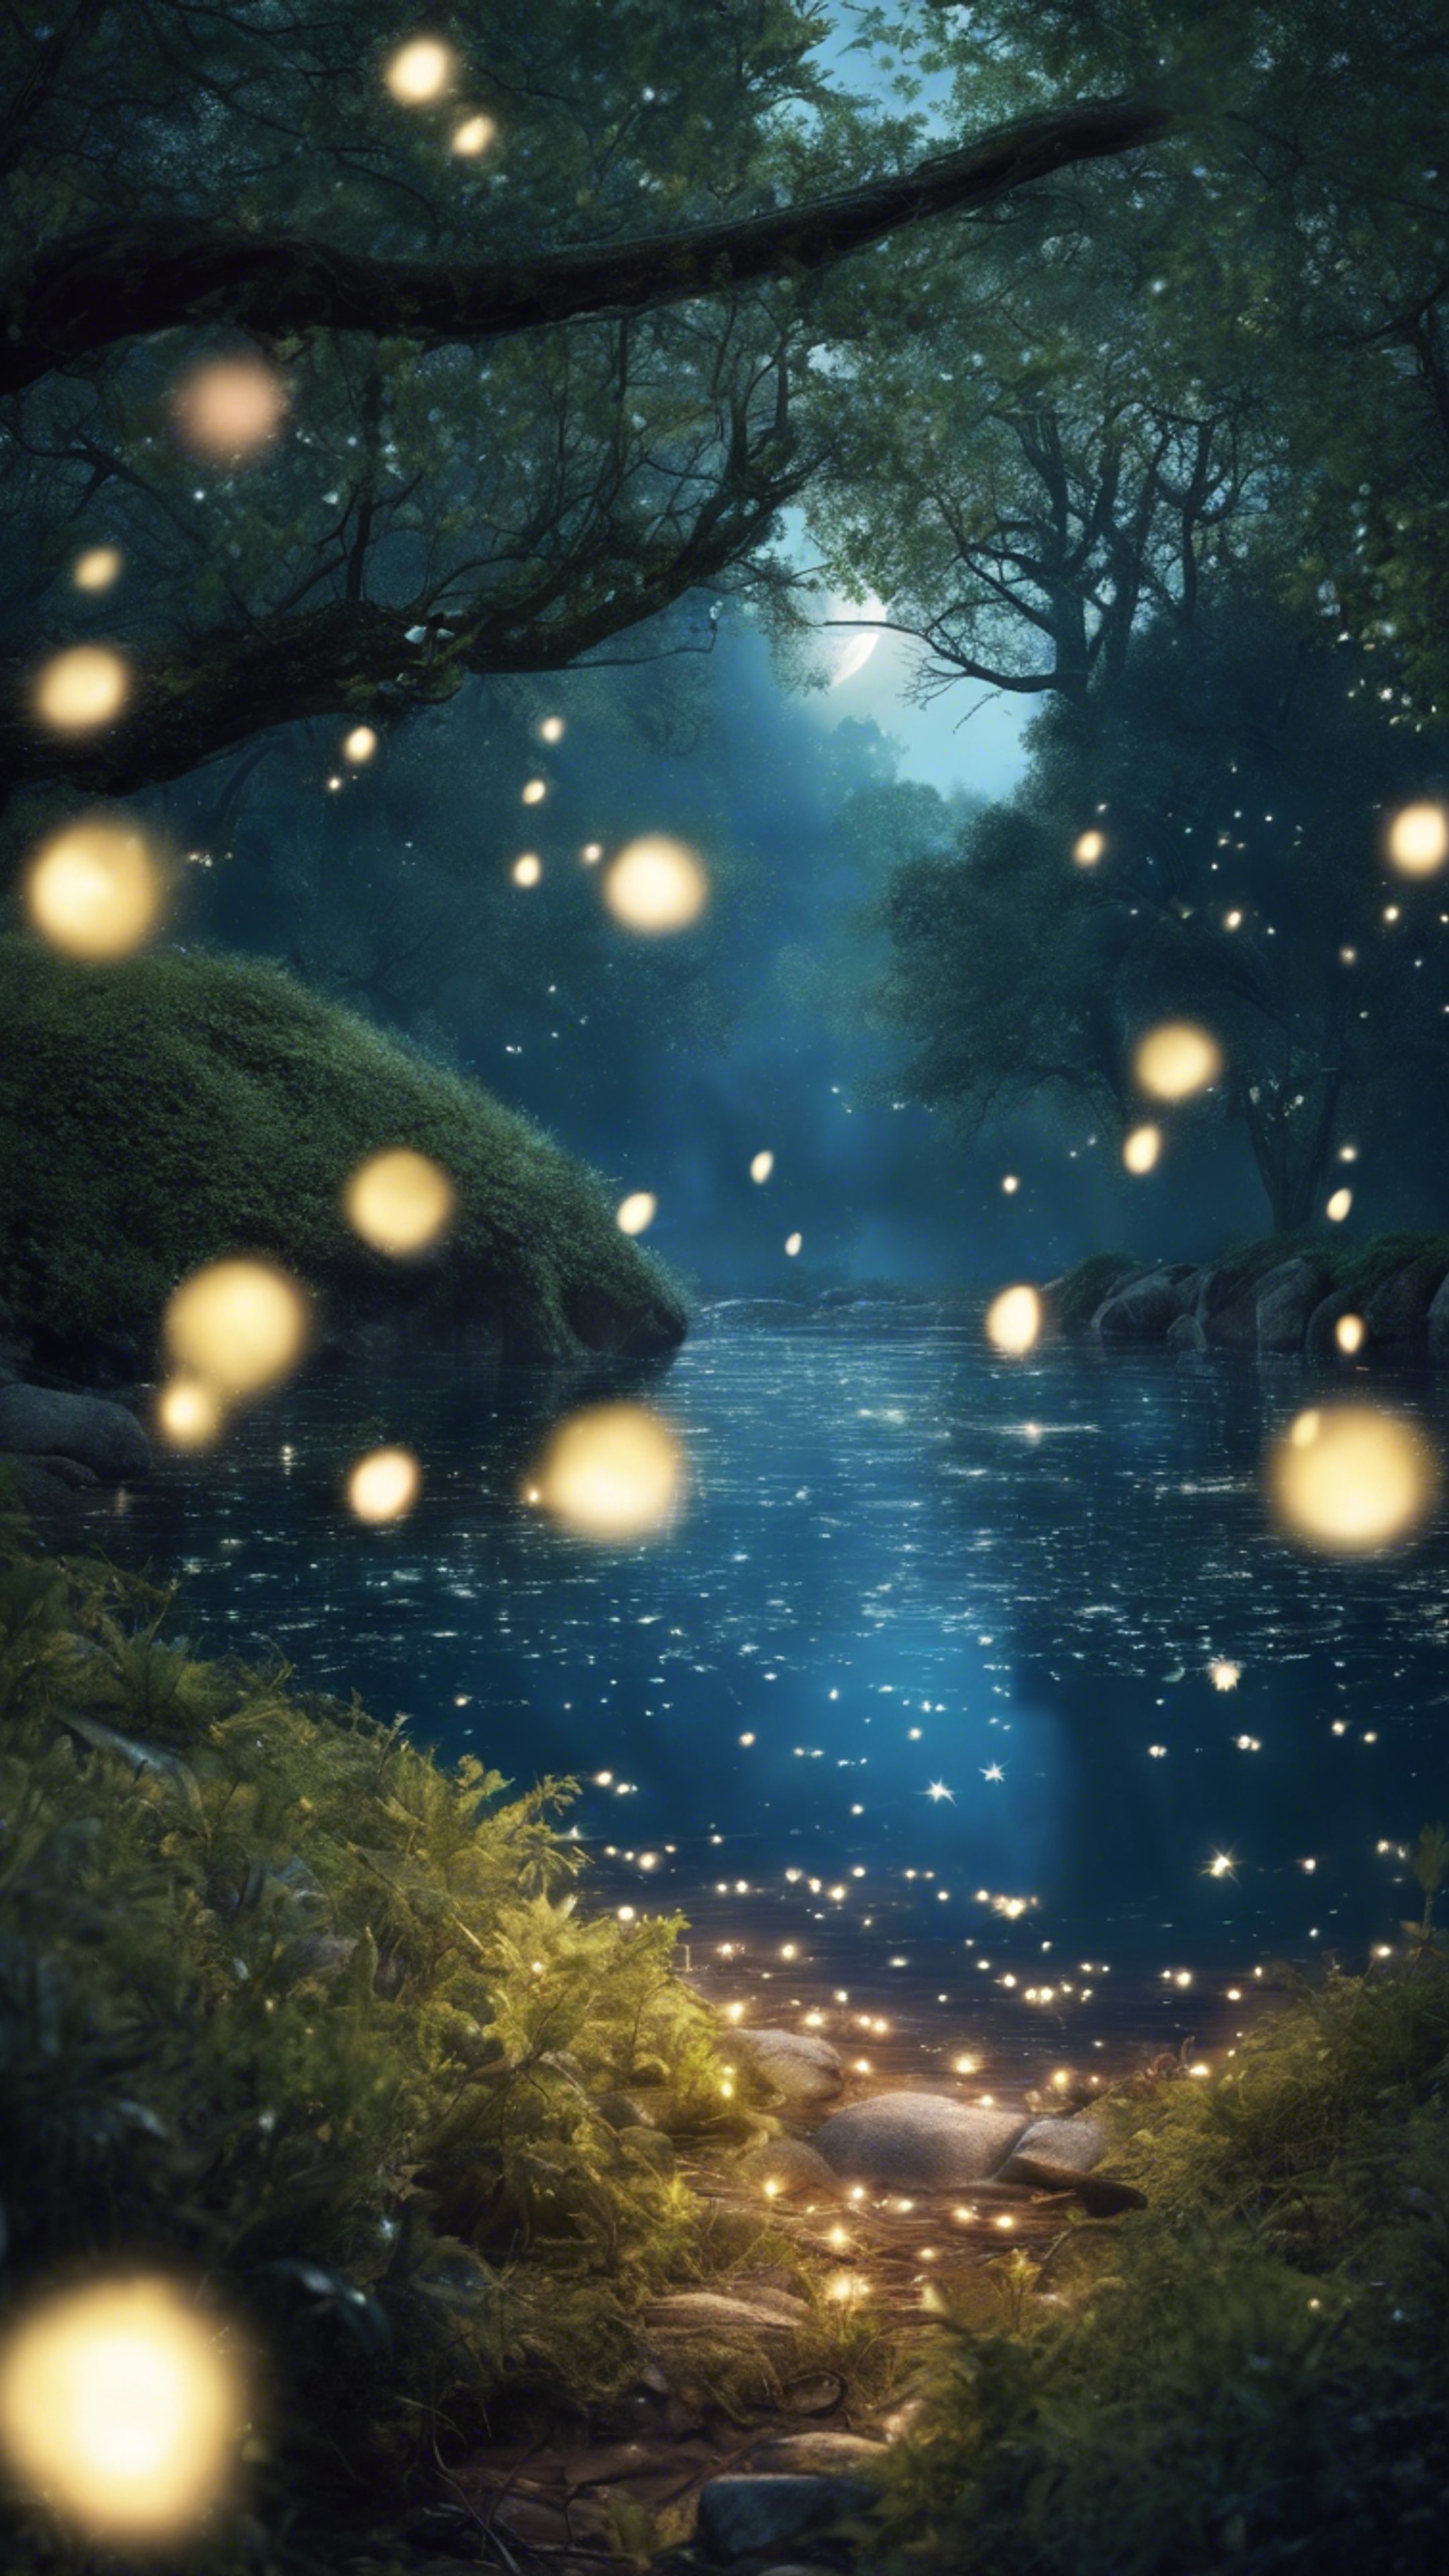 An enchanted forest lit up by midnight blue fireflies, with a river gleaming under the silver moon. Шпалери[9c93675377644e8e8e21]